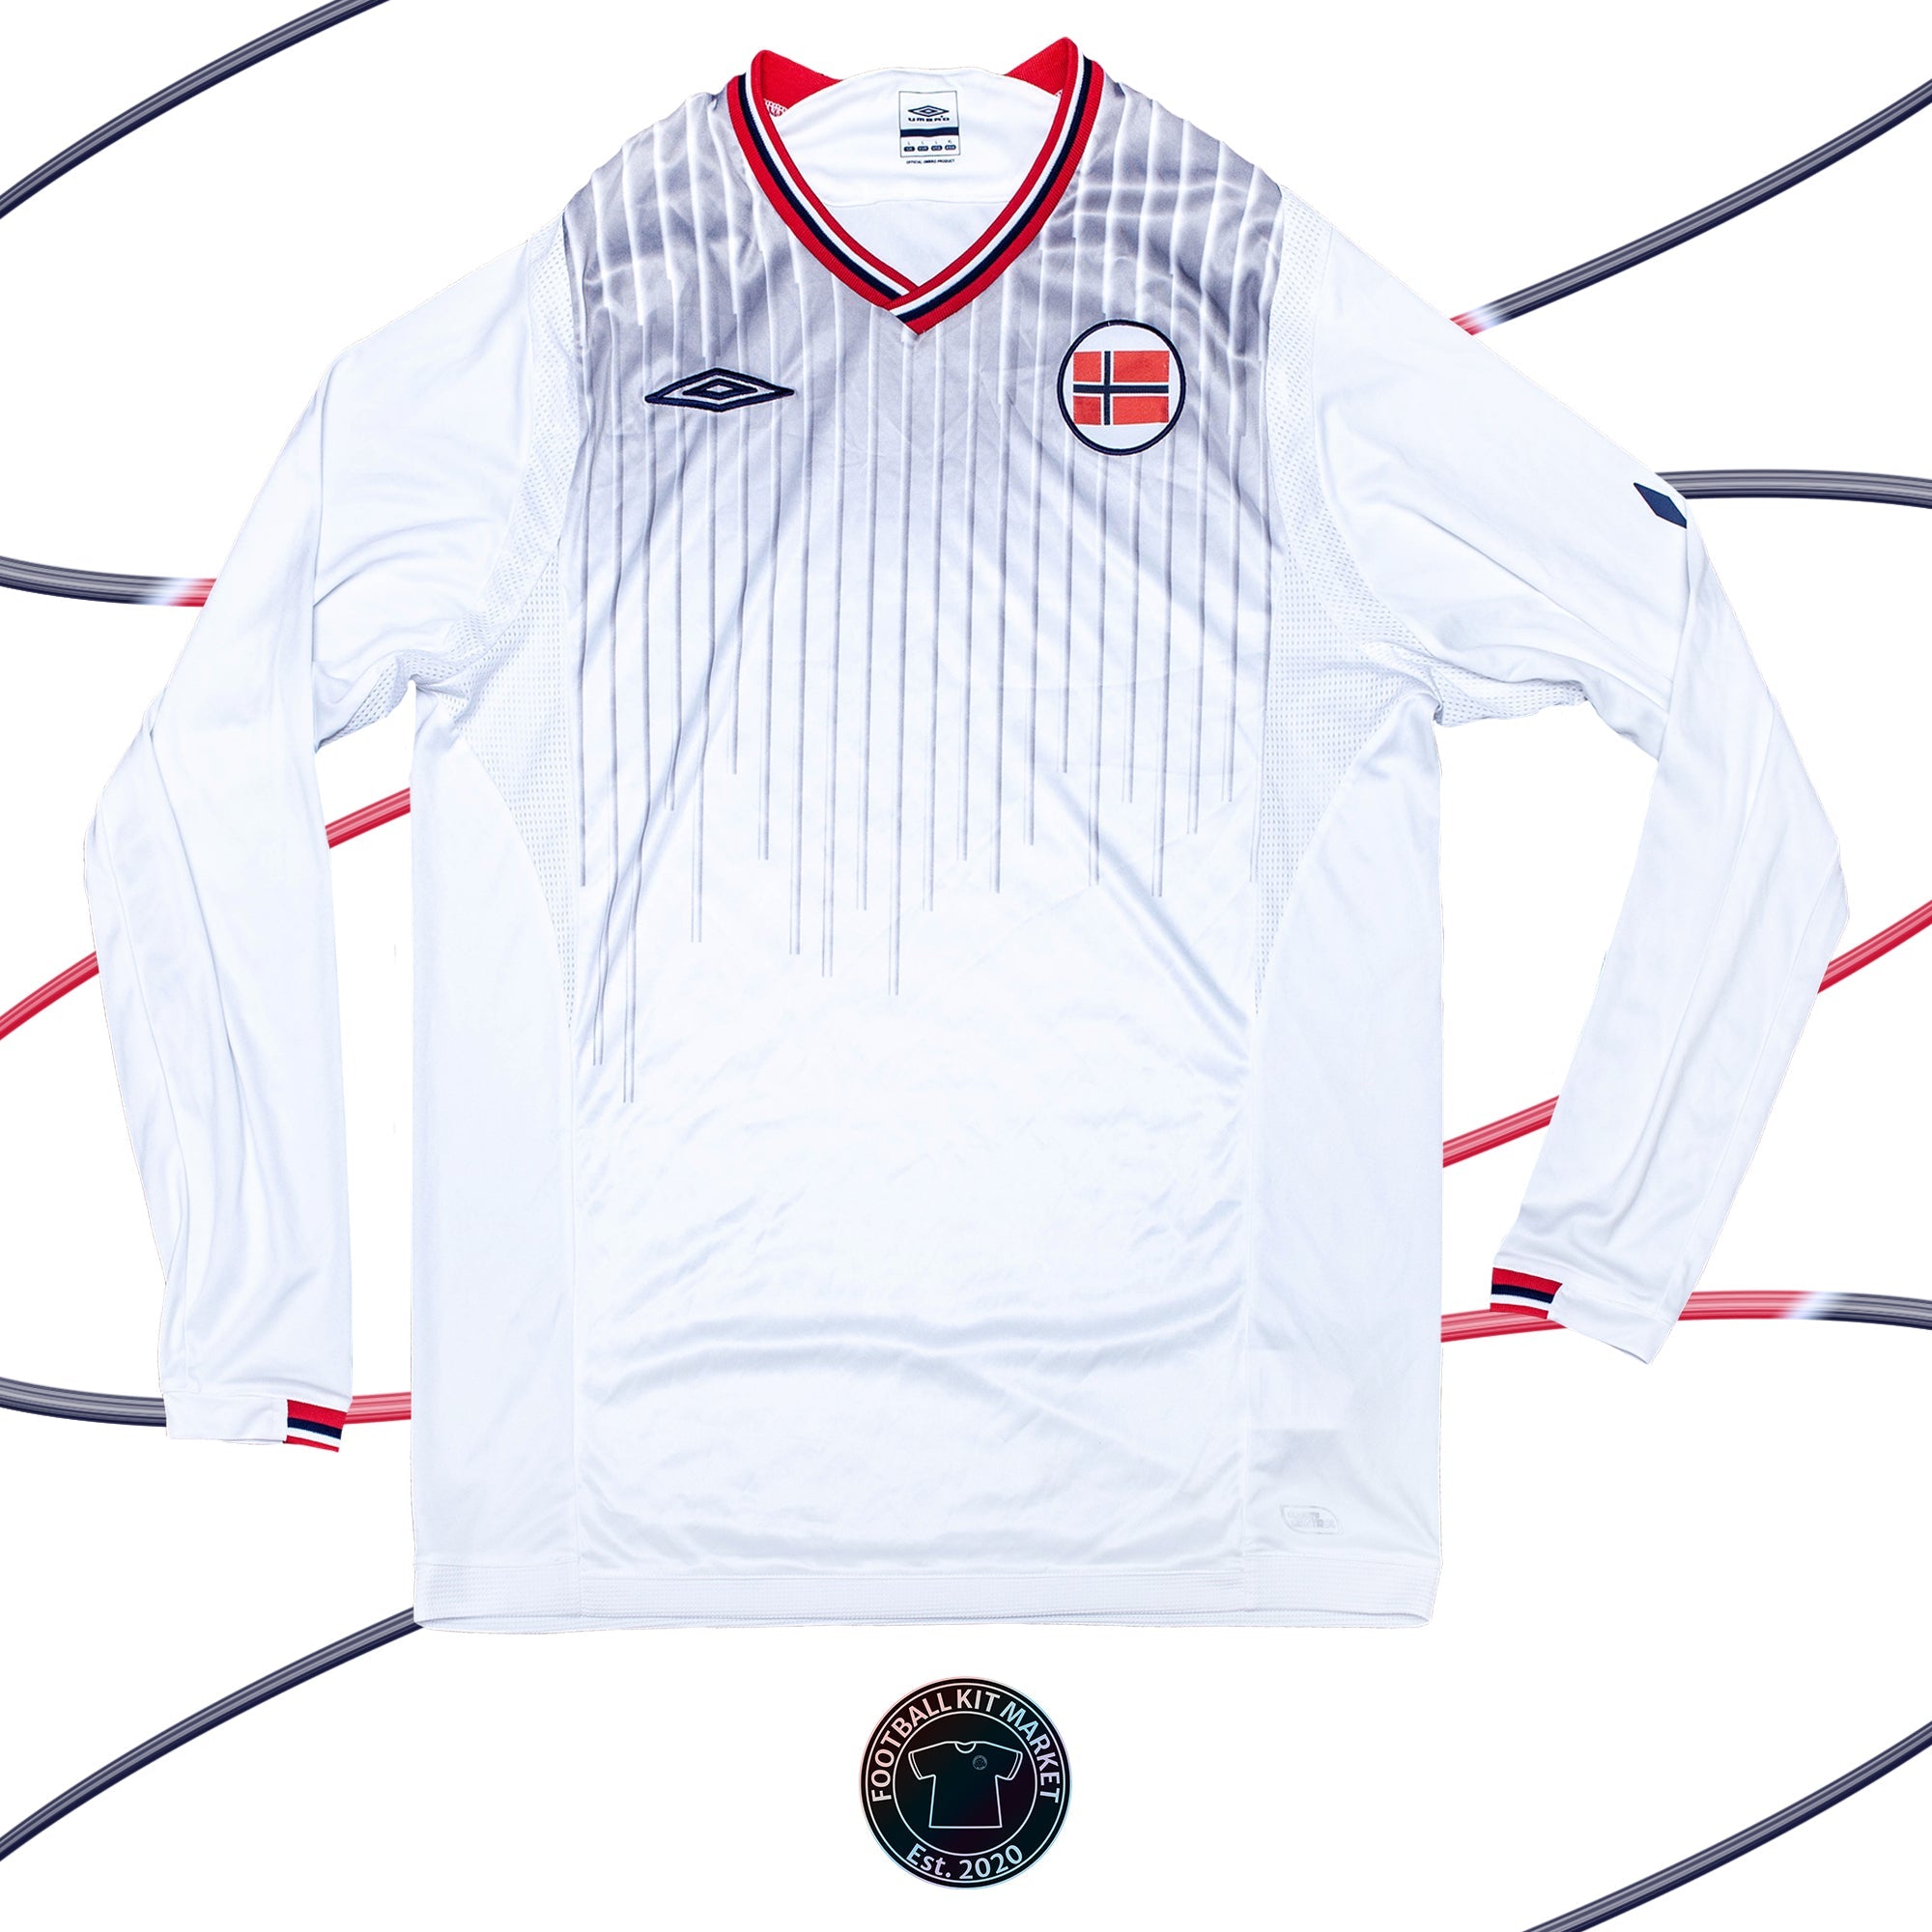 Genuine NORWAY Away (2011) - UMBRO (L) - Product Image from Football Kit Market